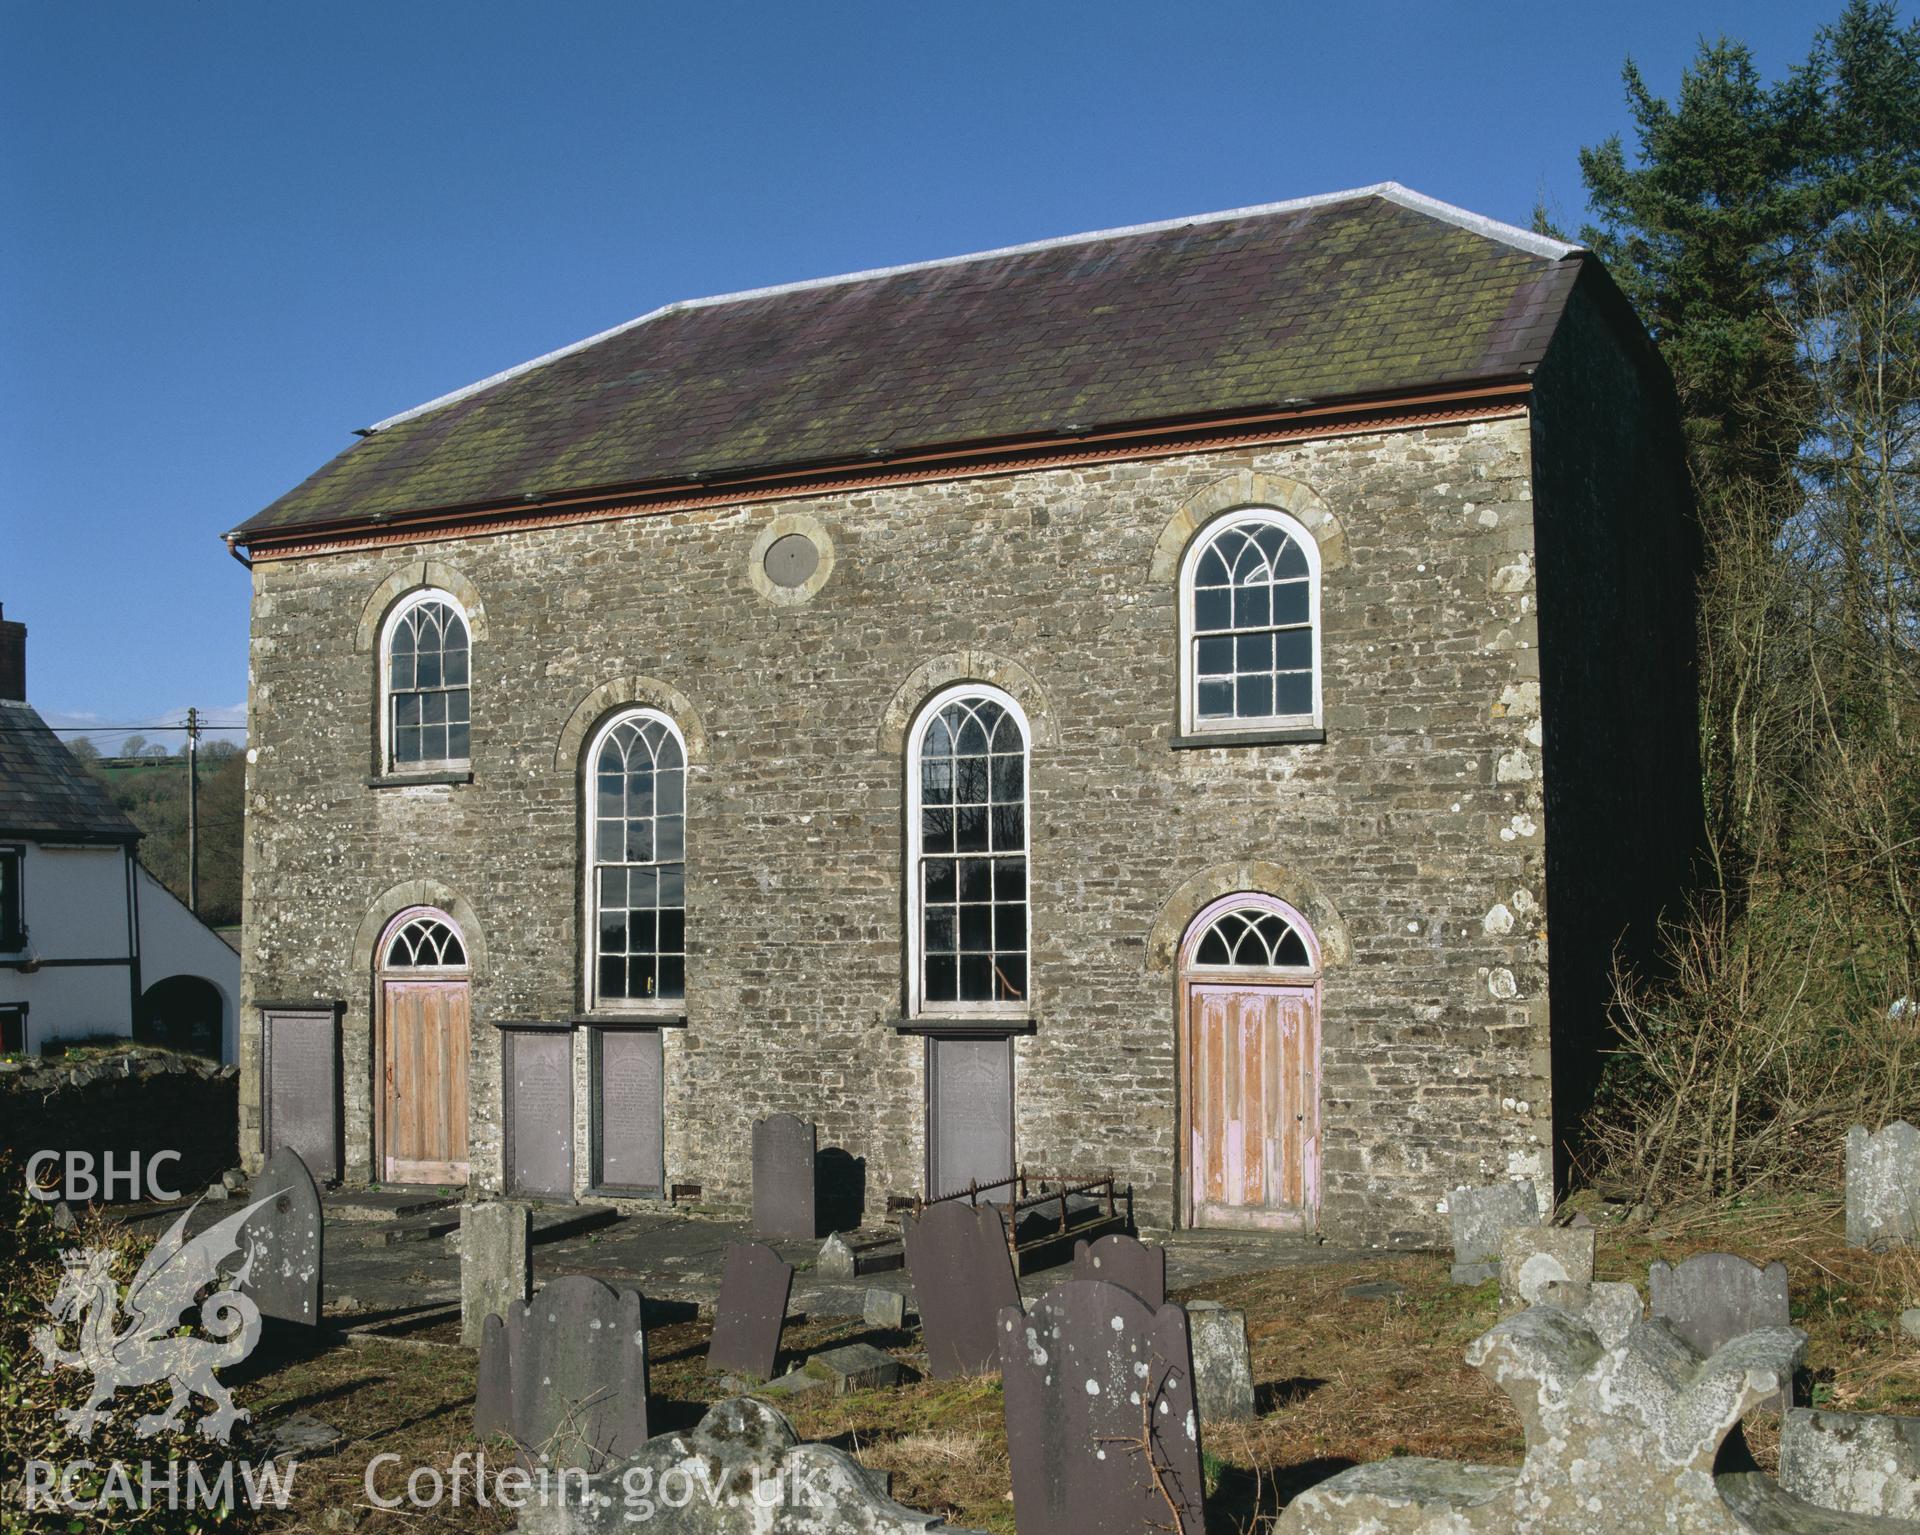 Colour transparency showing an exterior view of Llwynrhydowen Chapel, produced by Iain Wright, June 2004